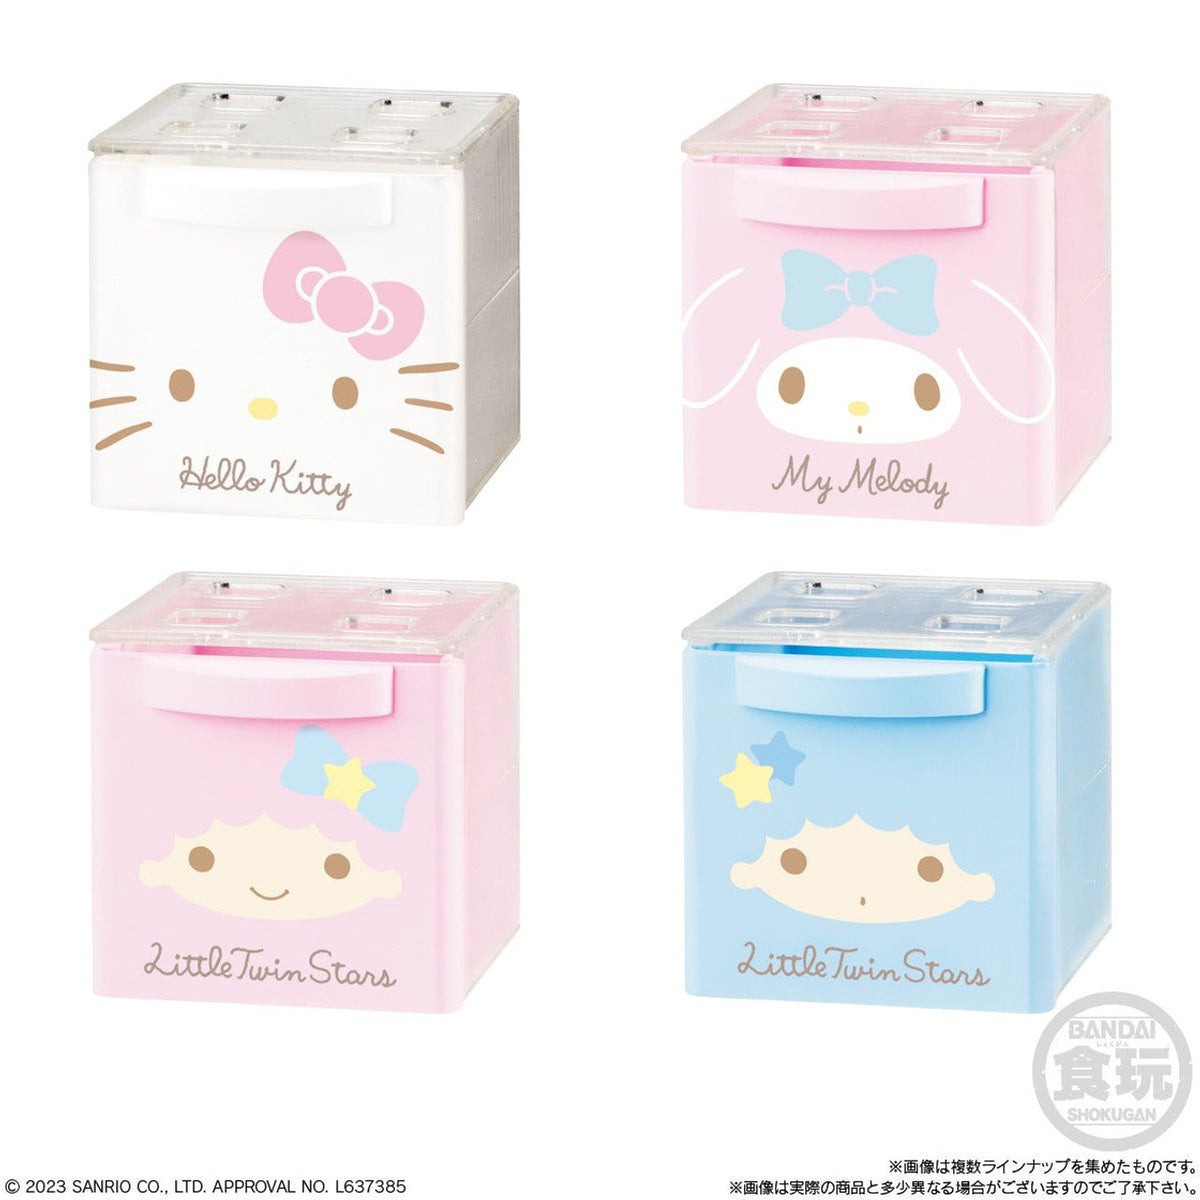 Sanrio Charaters Cucase Collection-Single Box (Random)-Re-Ment-Ace Cards &amp; Collectibles